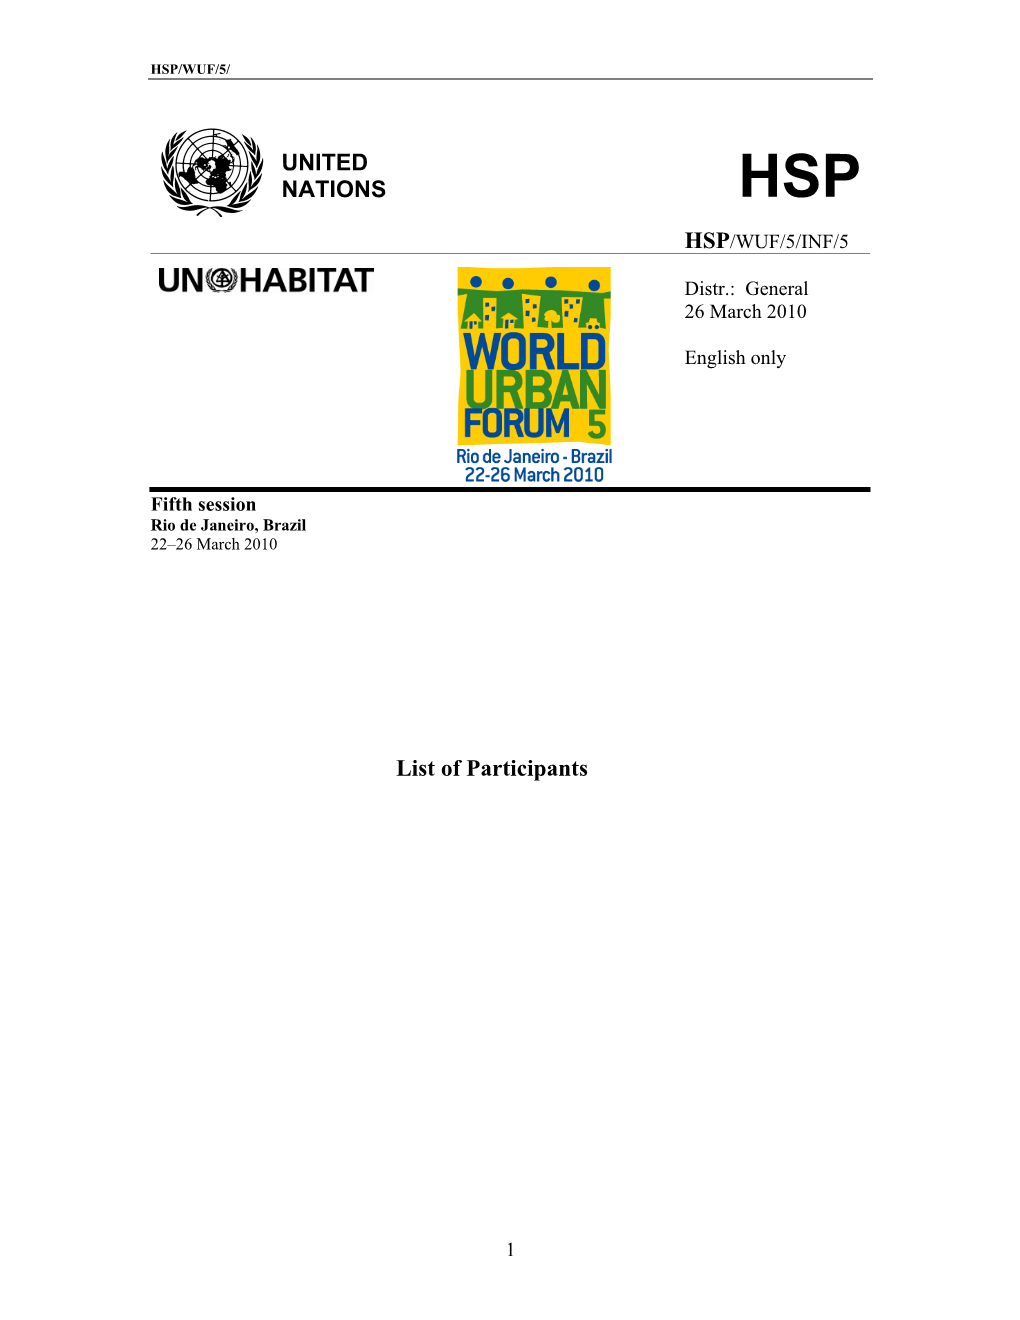 UNITED NATIONS List of Participants